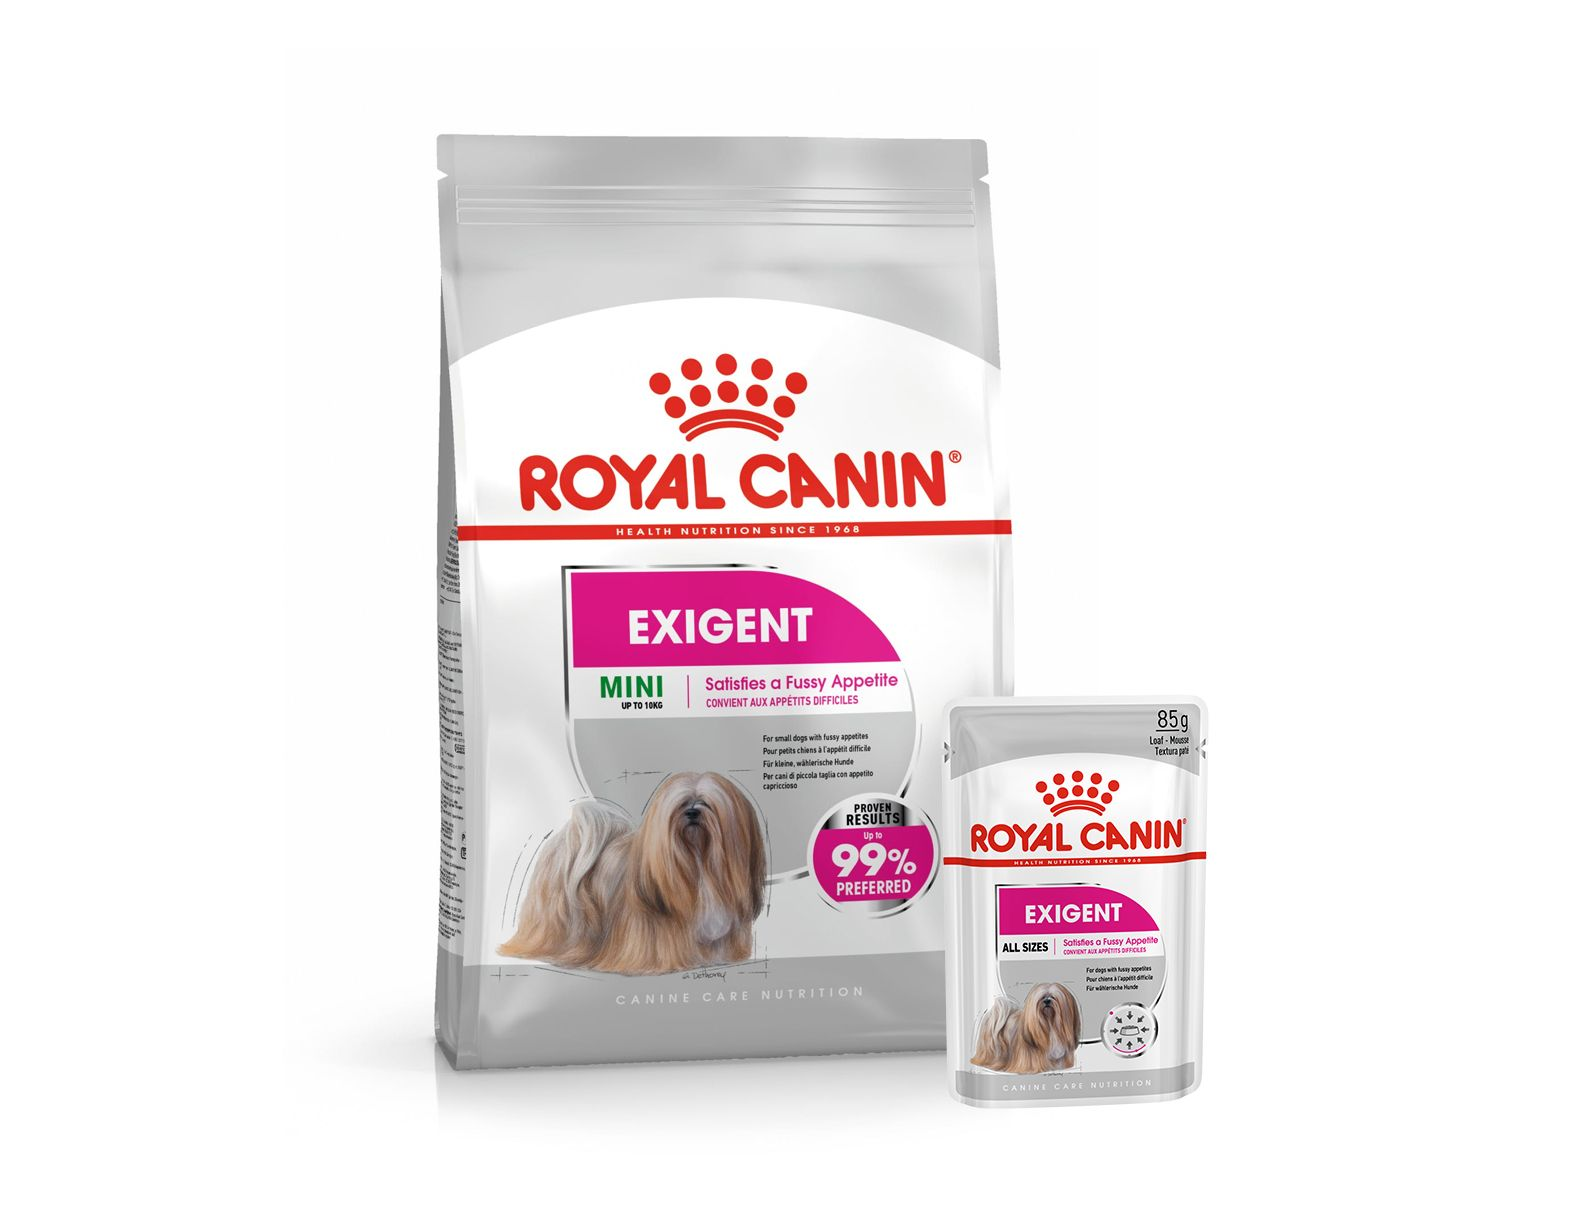 Exigent for Mini dogs